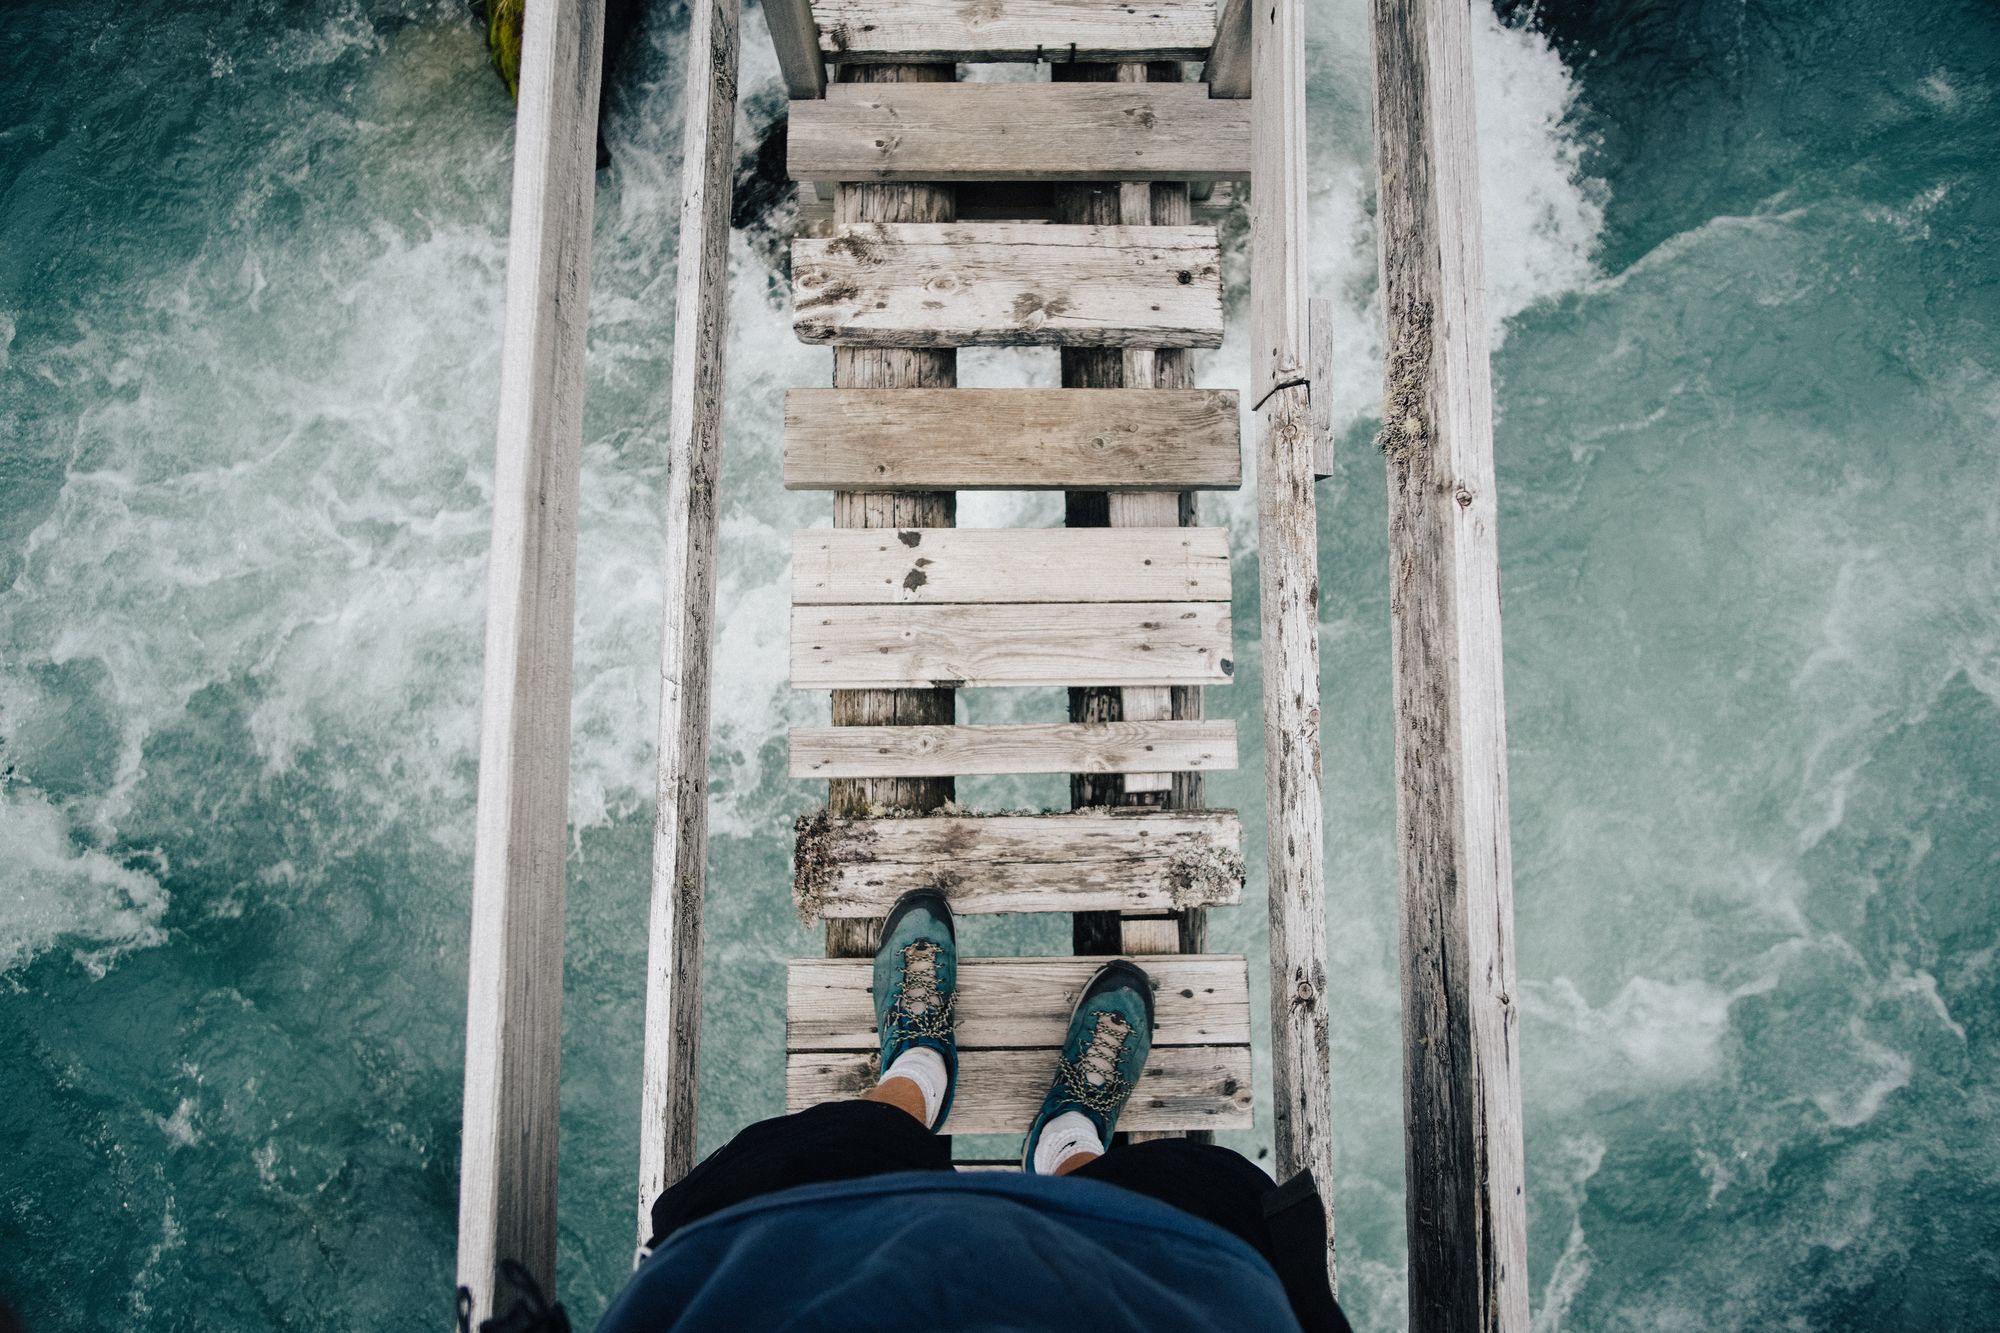 Above view of a person's feet about to cross a rickety bridge over turbulent water